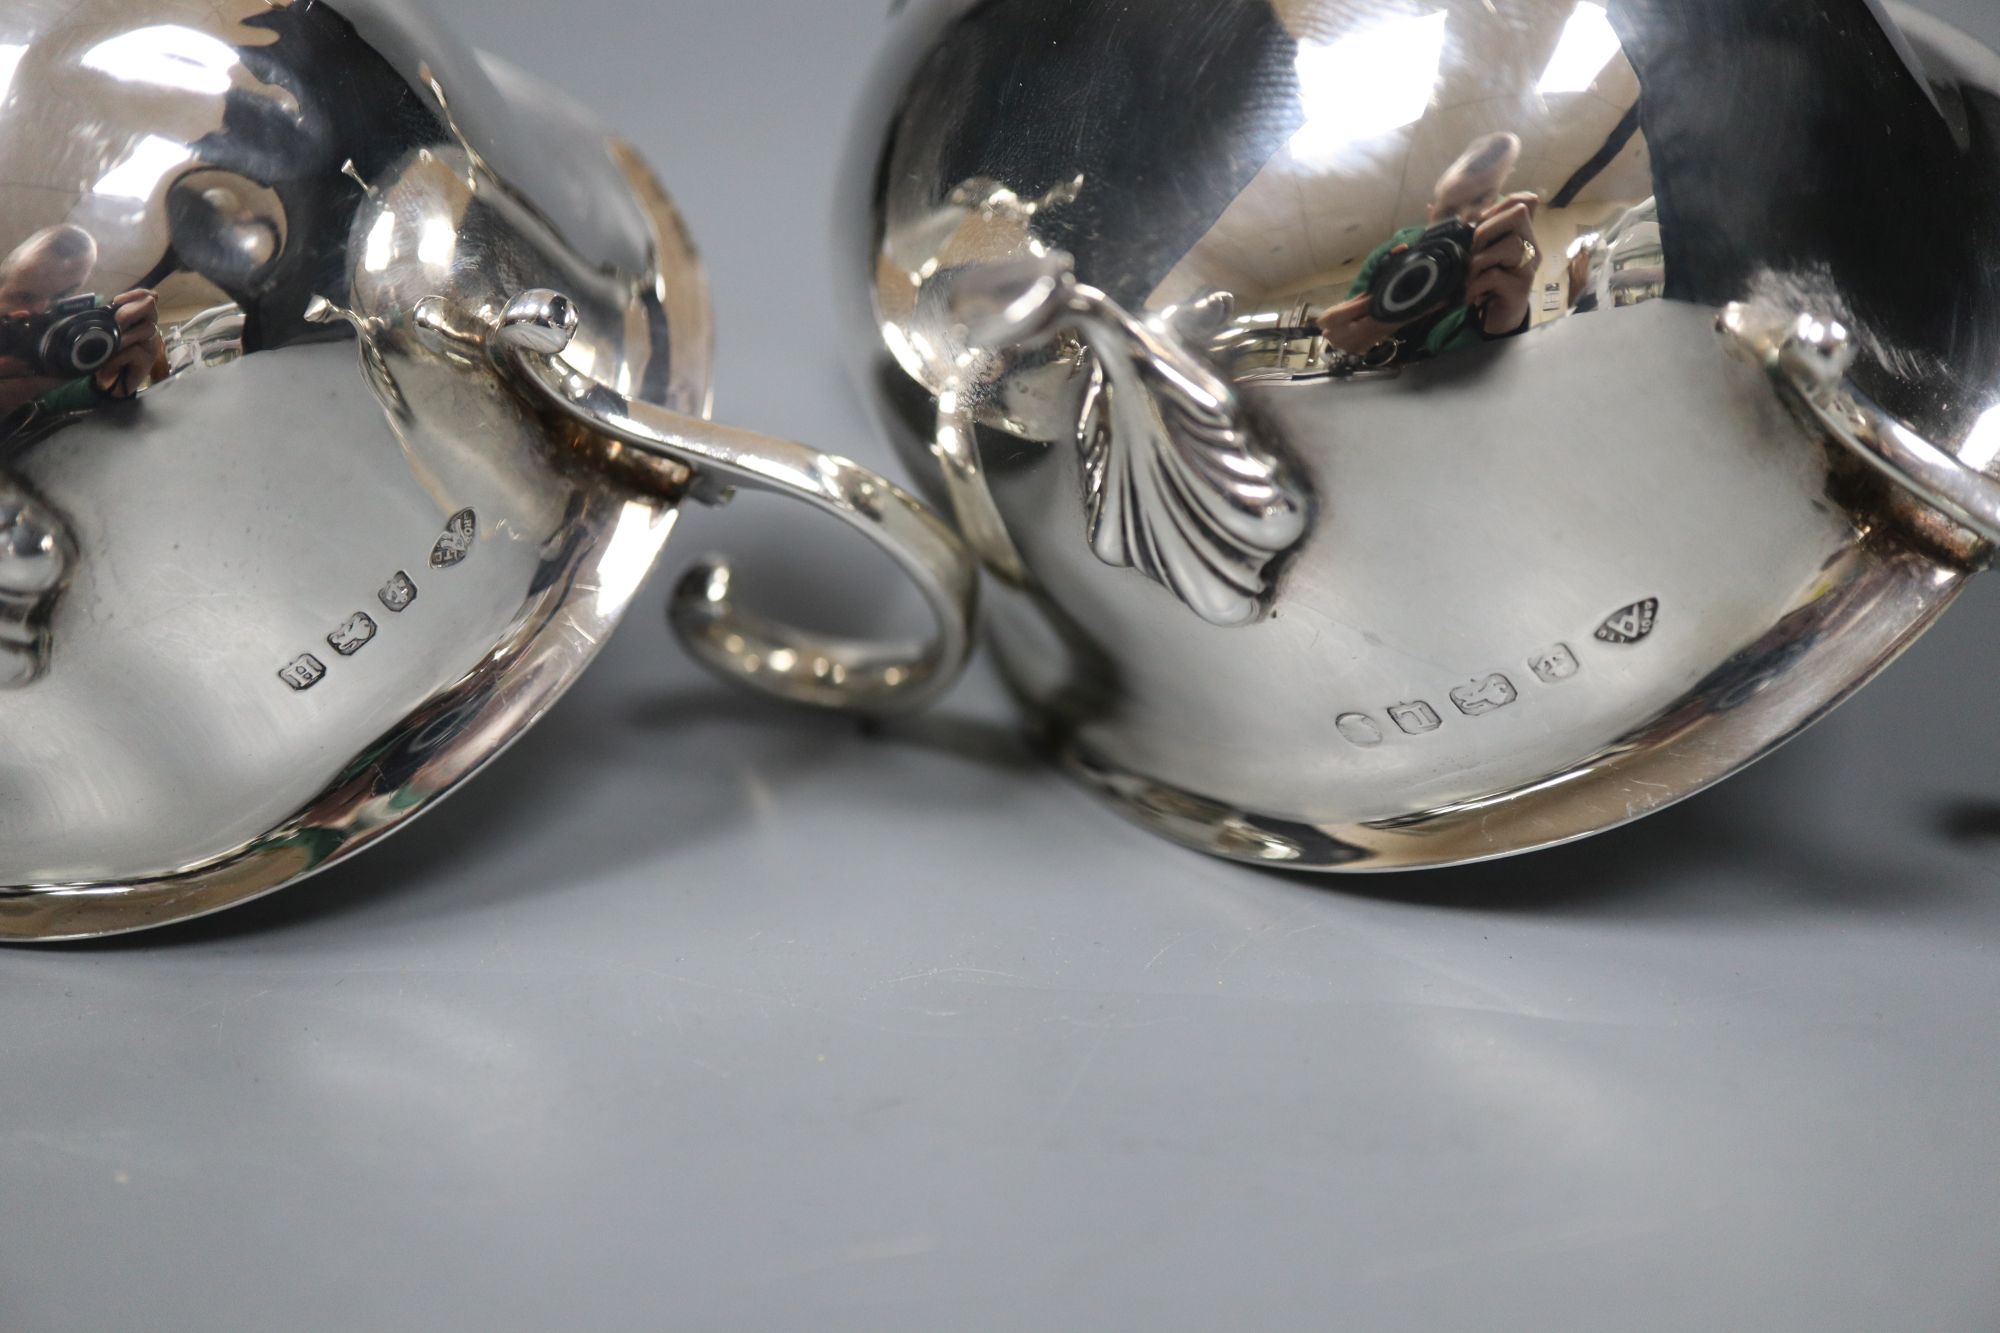 A pair of 1930s silver sauceboats, 5.5 oz and a plated sauceboat.